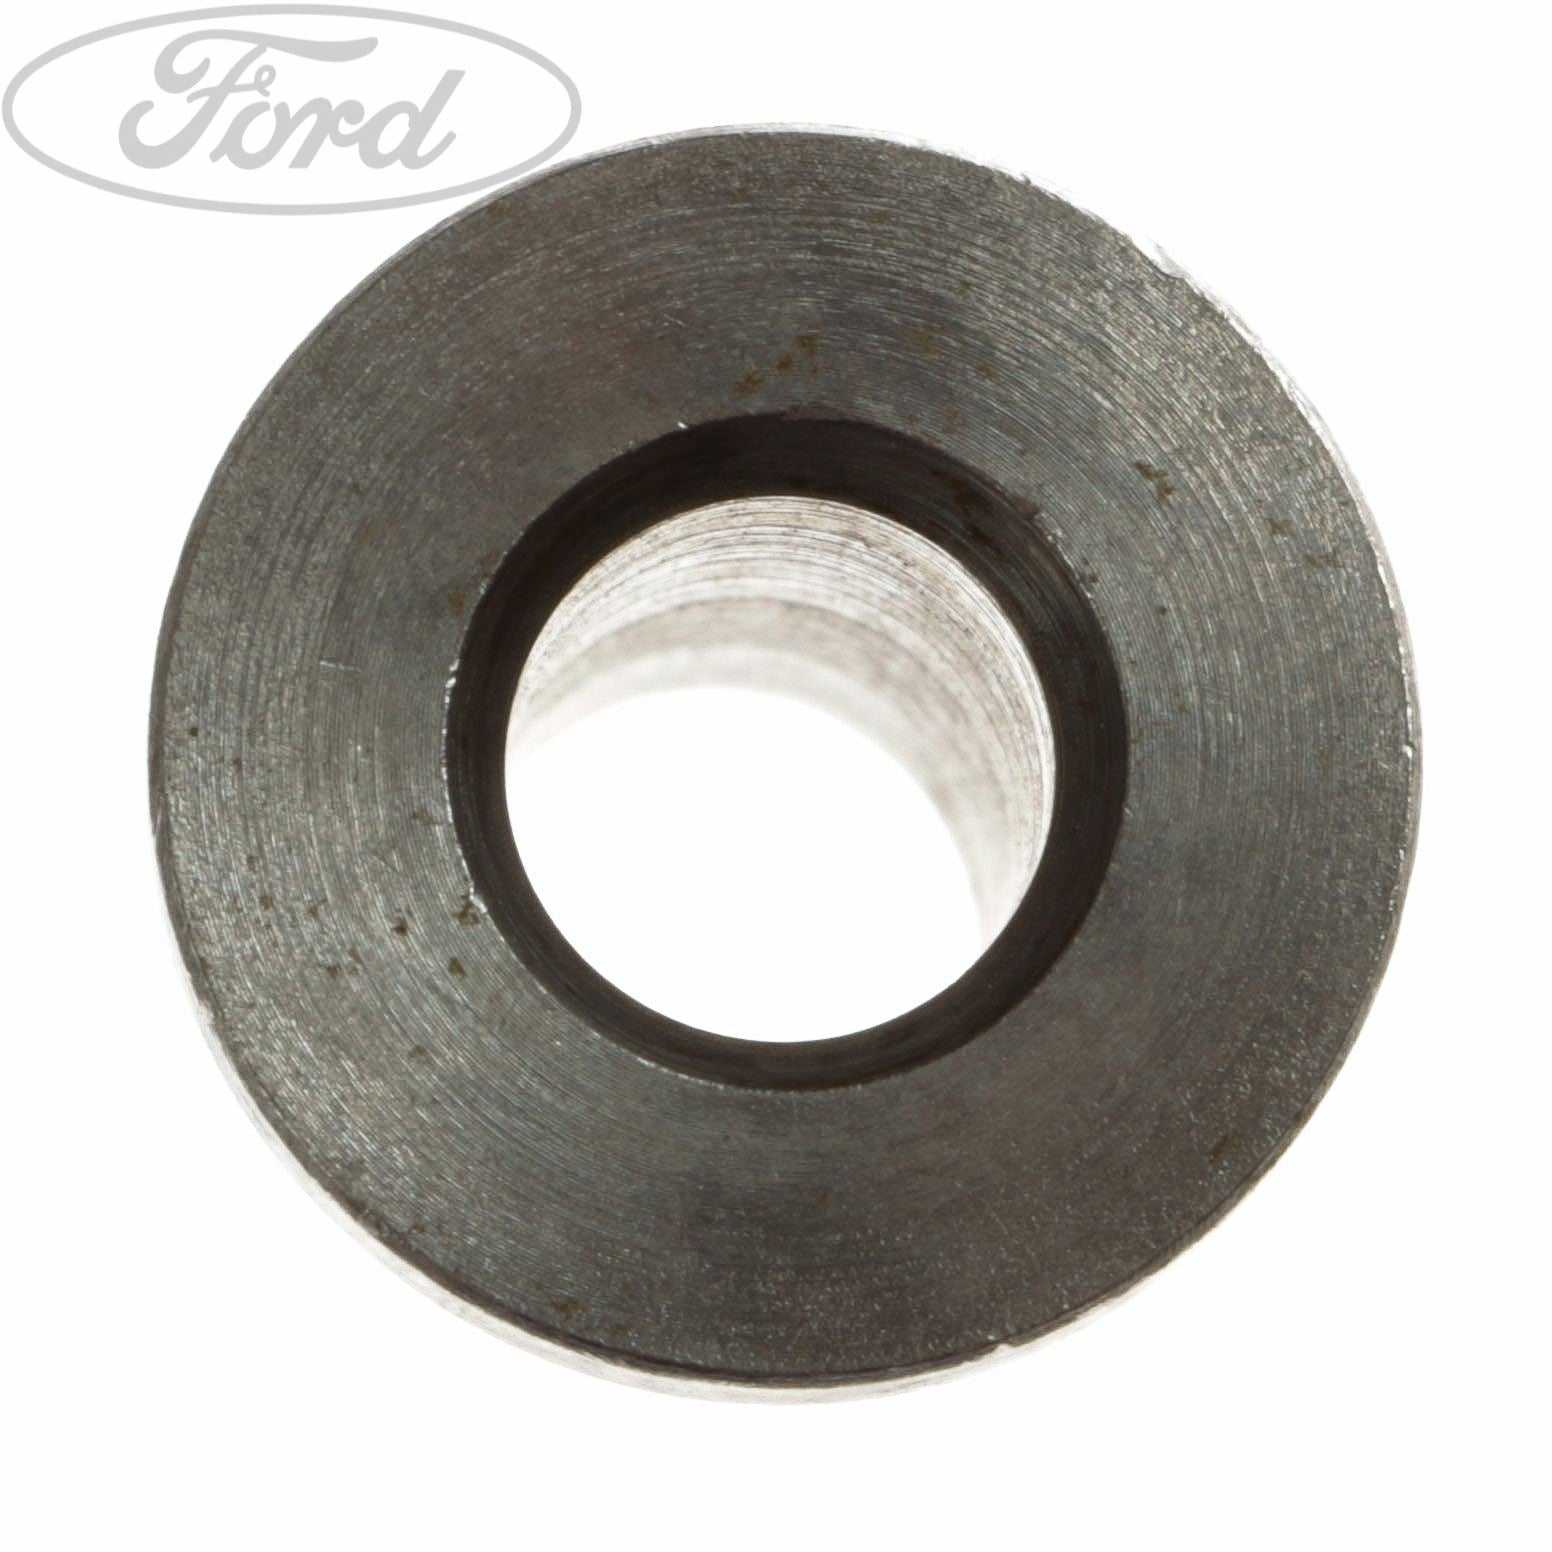 Ford, TRANSMISSION GUIDE PLATE DOWEL